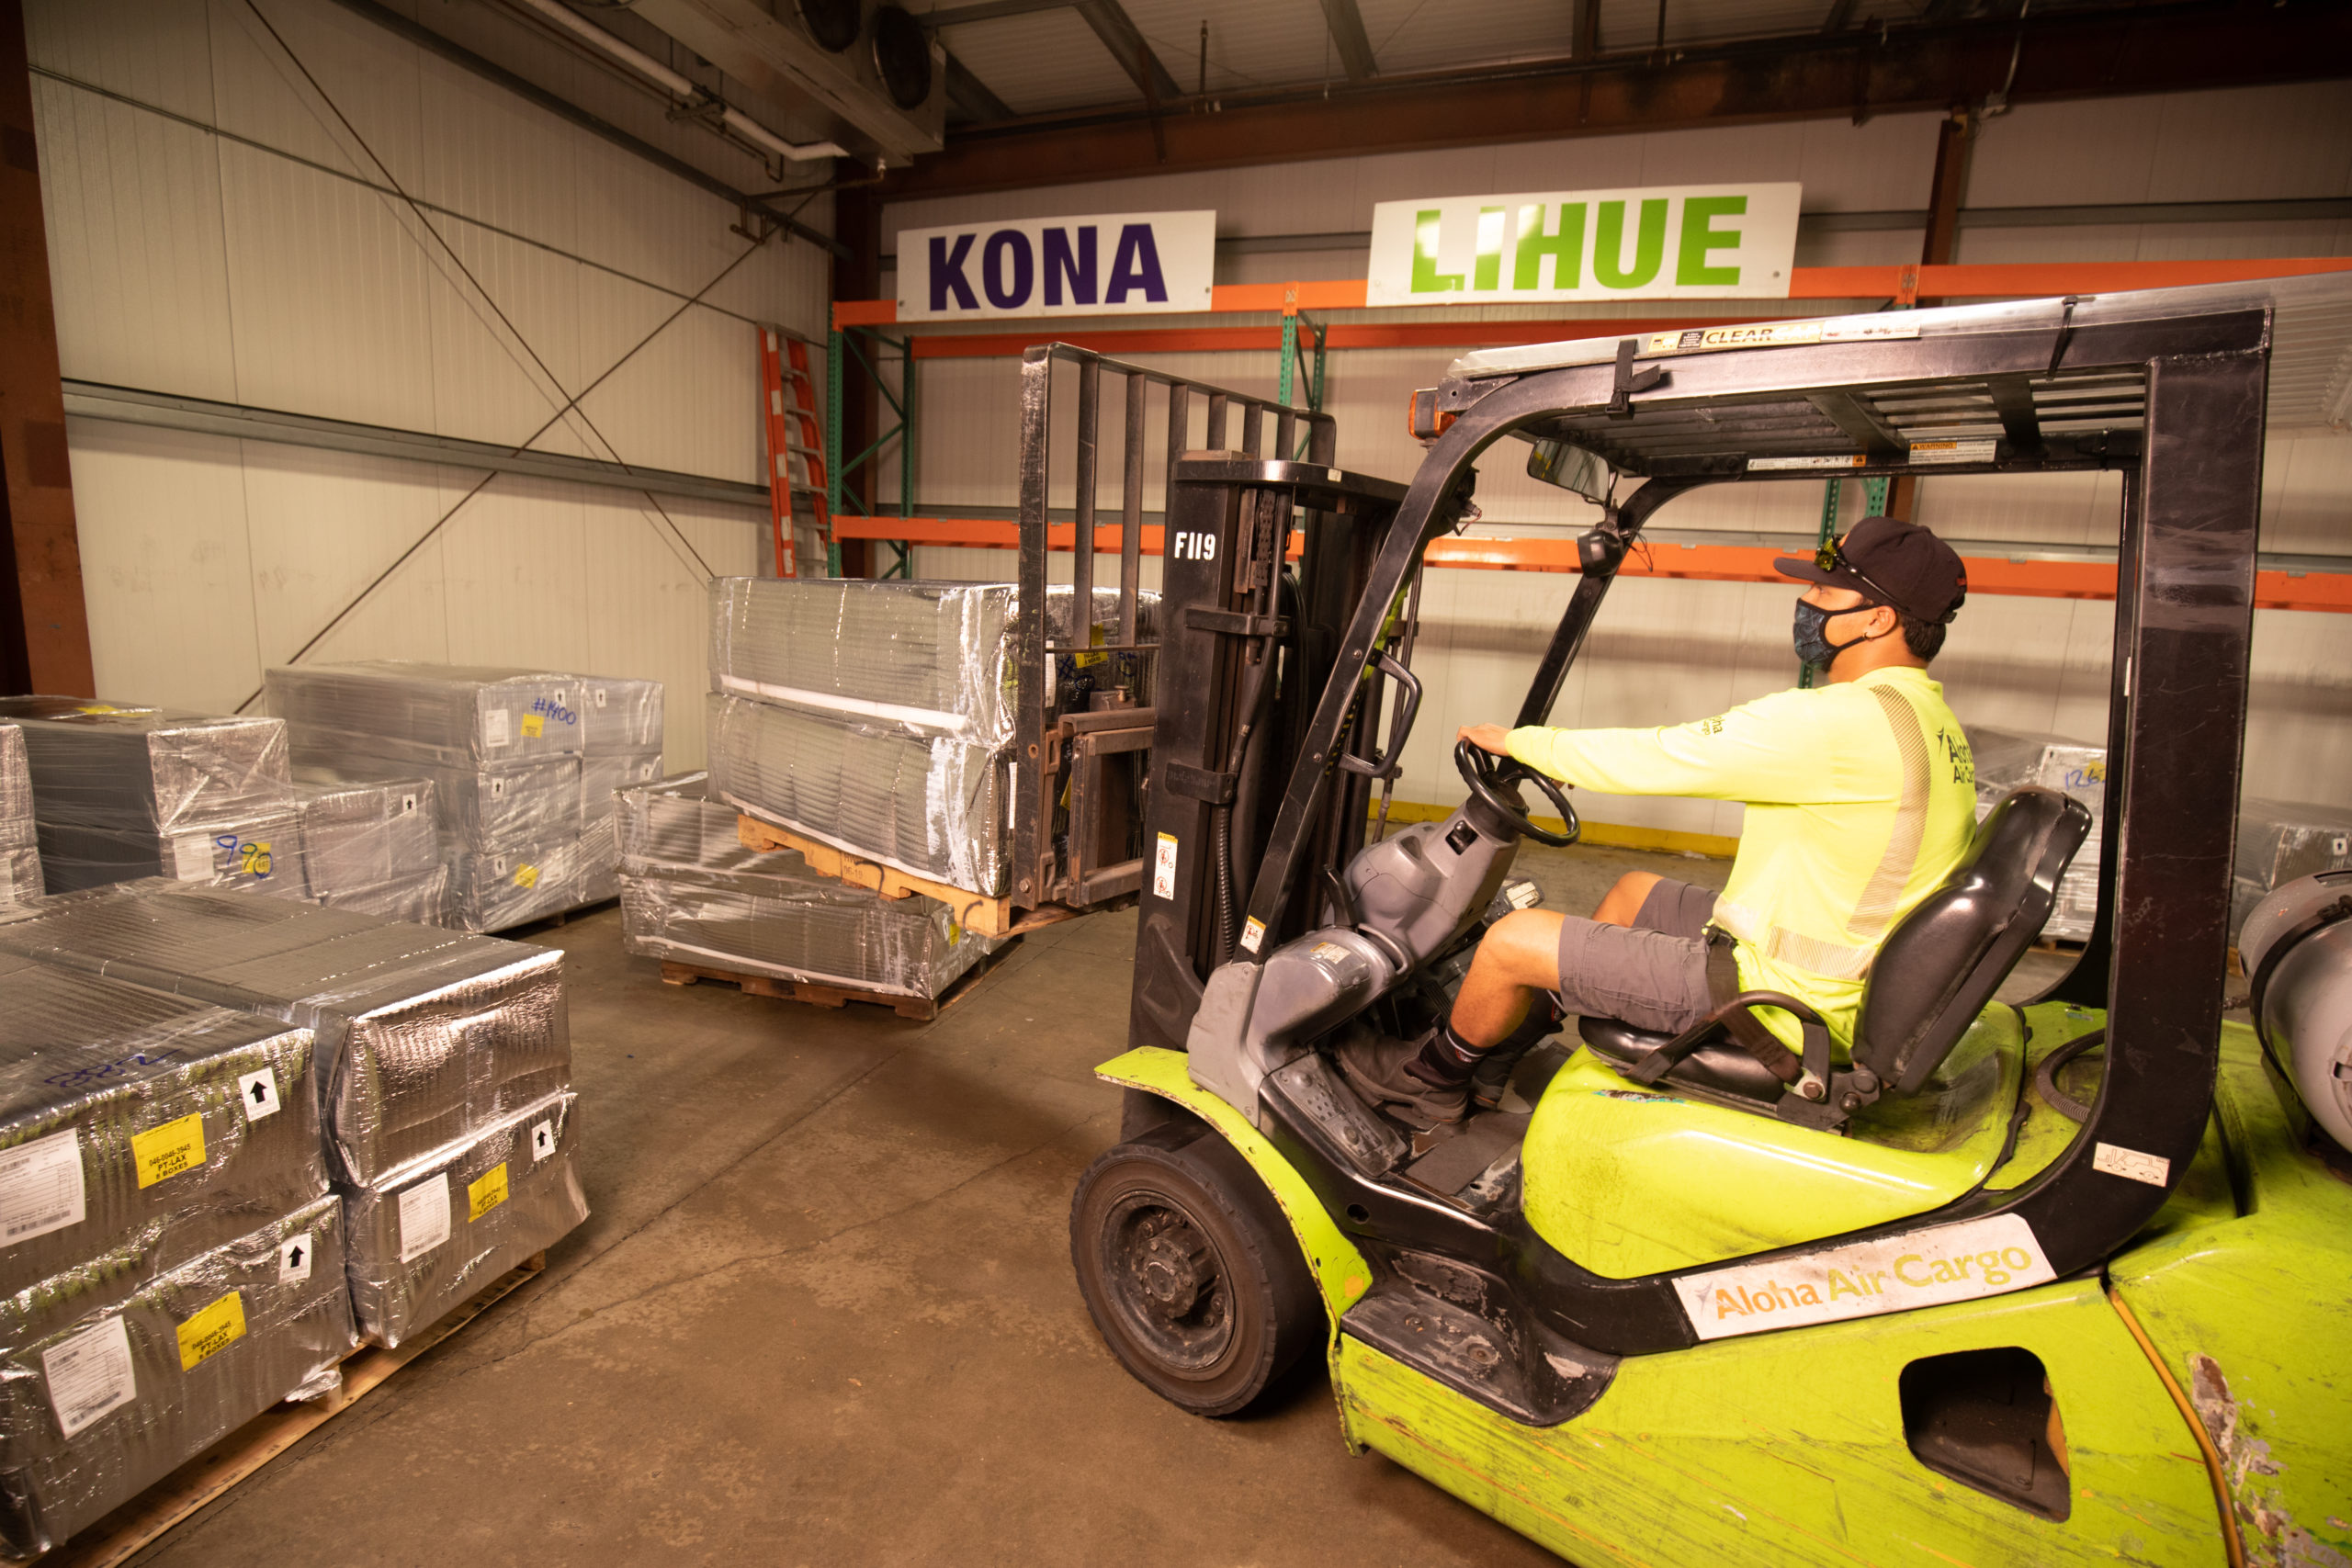 A person operating a vehicle inside a warehouse